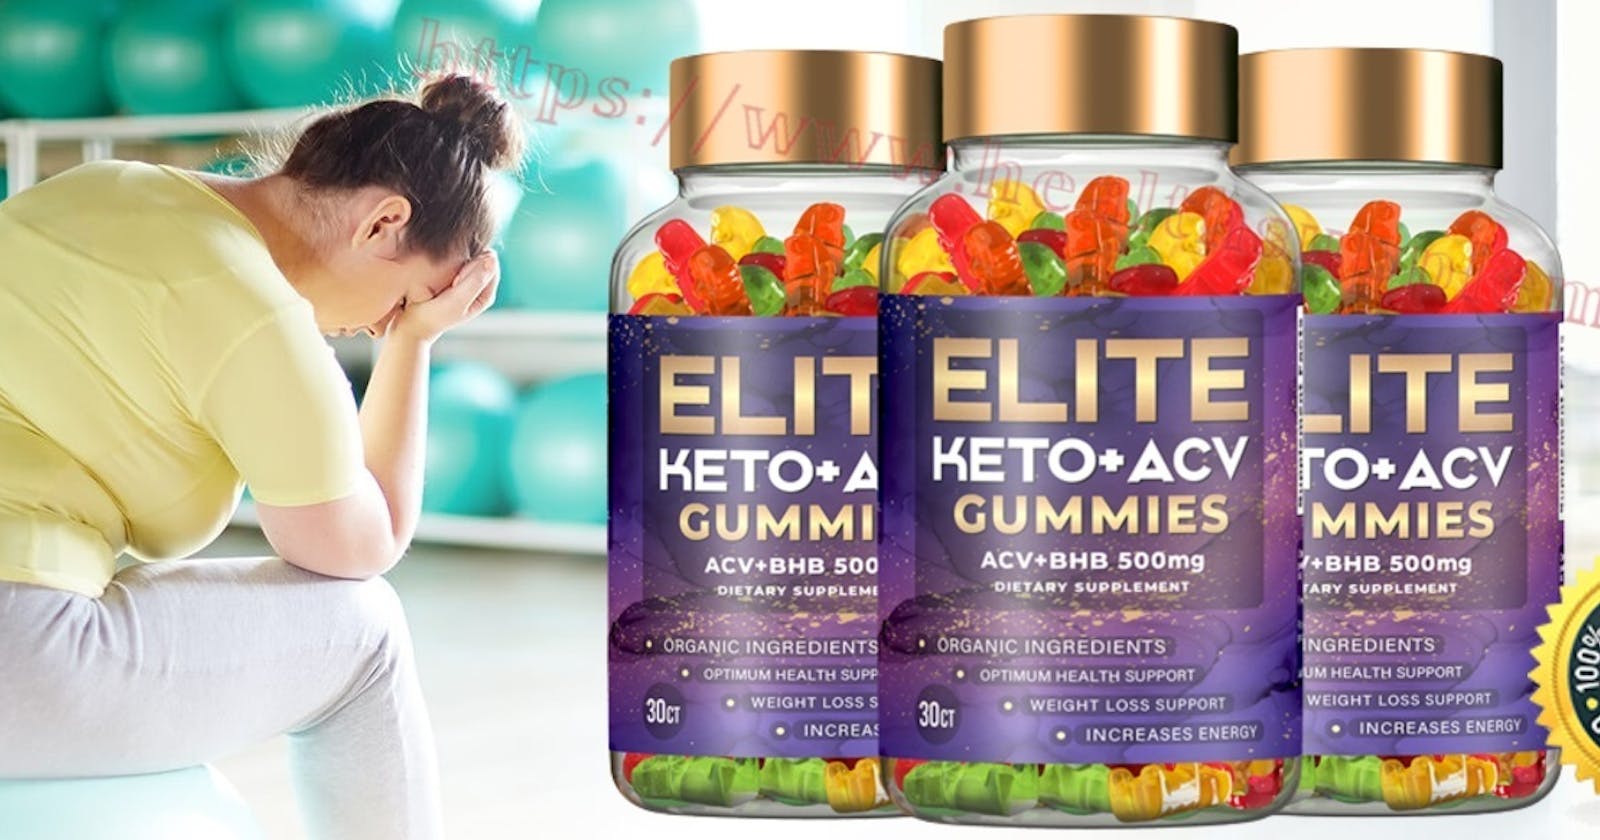 Elite Keto + ACV Gummies Fast And Easy Ways To Reduce Your Body Weight & Fat Get Result In Just Few Weeks(REAL OR HOAX)